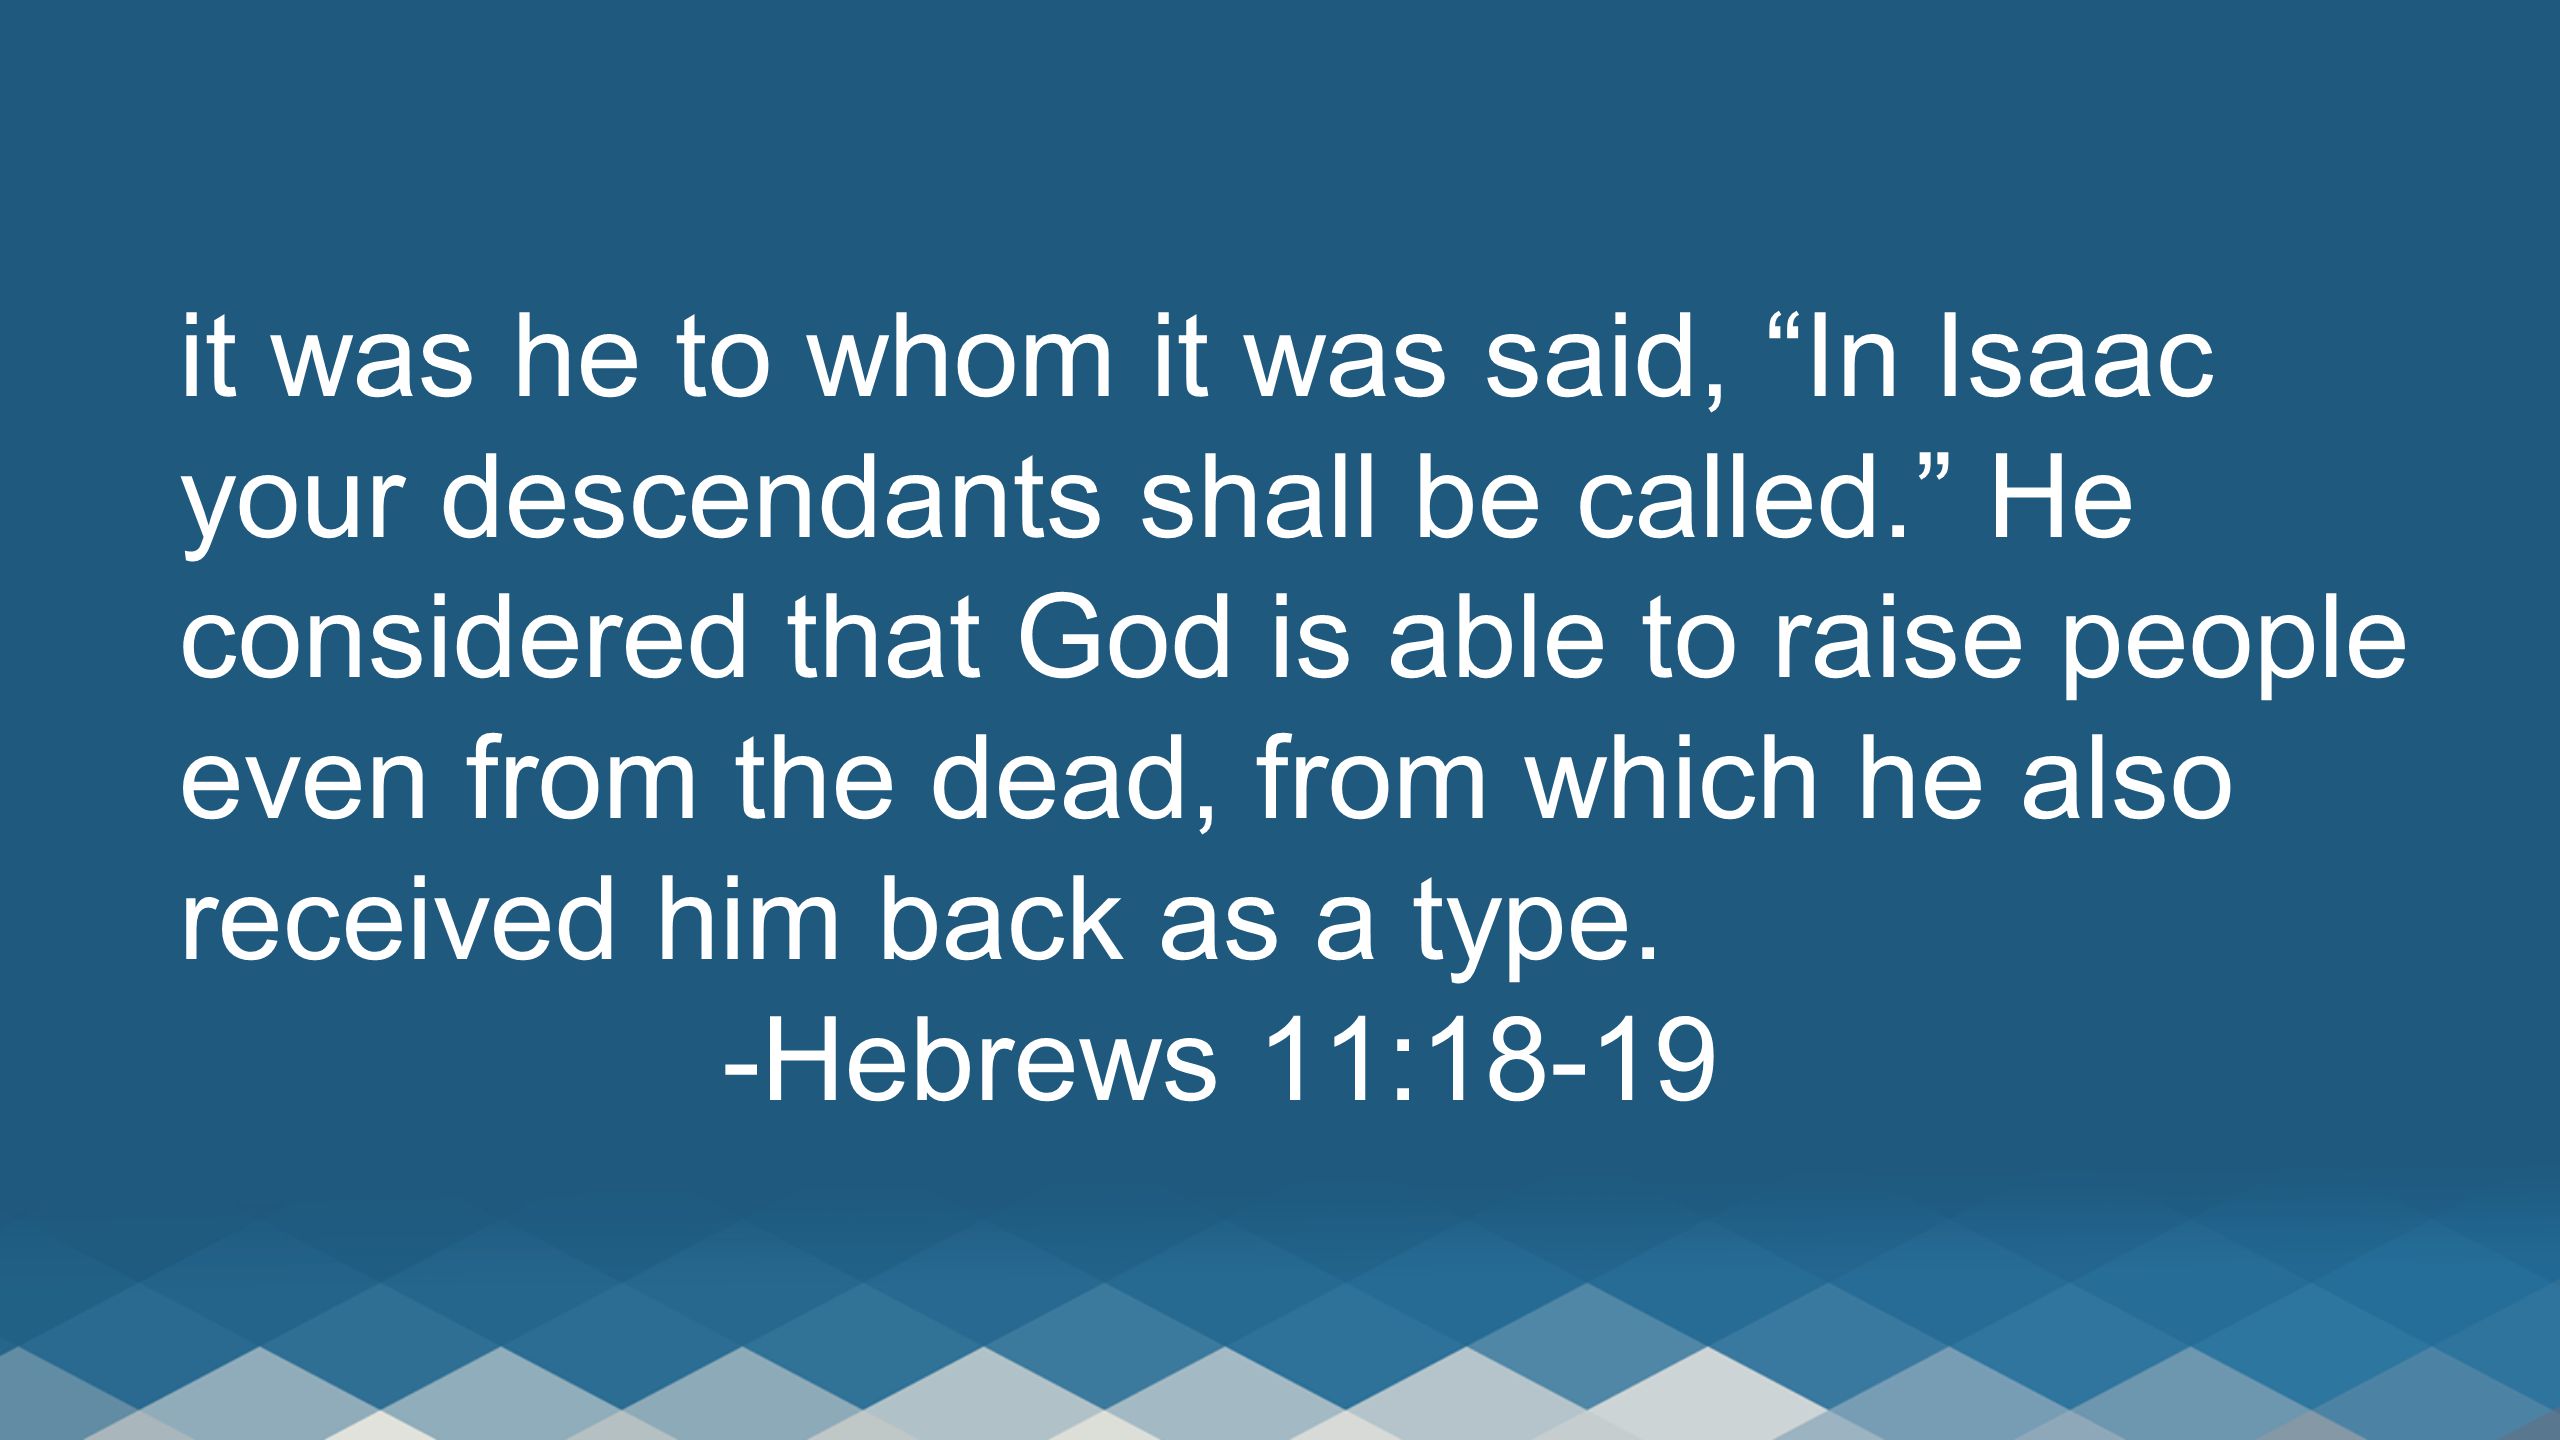 it was he to whom it was said, In Isaac your descendants shall be called. He considered that God is able to raise people even from the dead, from which he also received him back as a type.